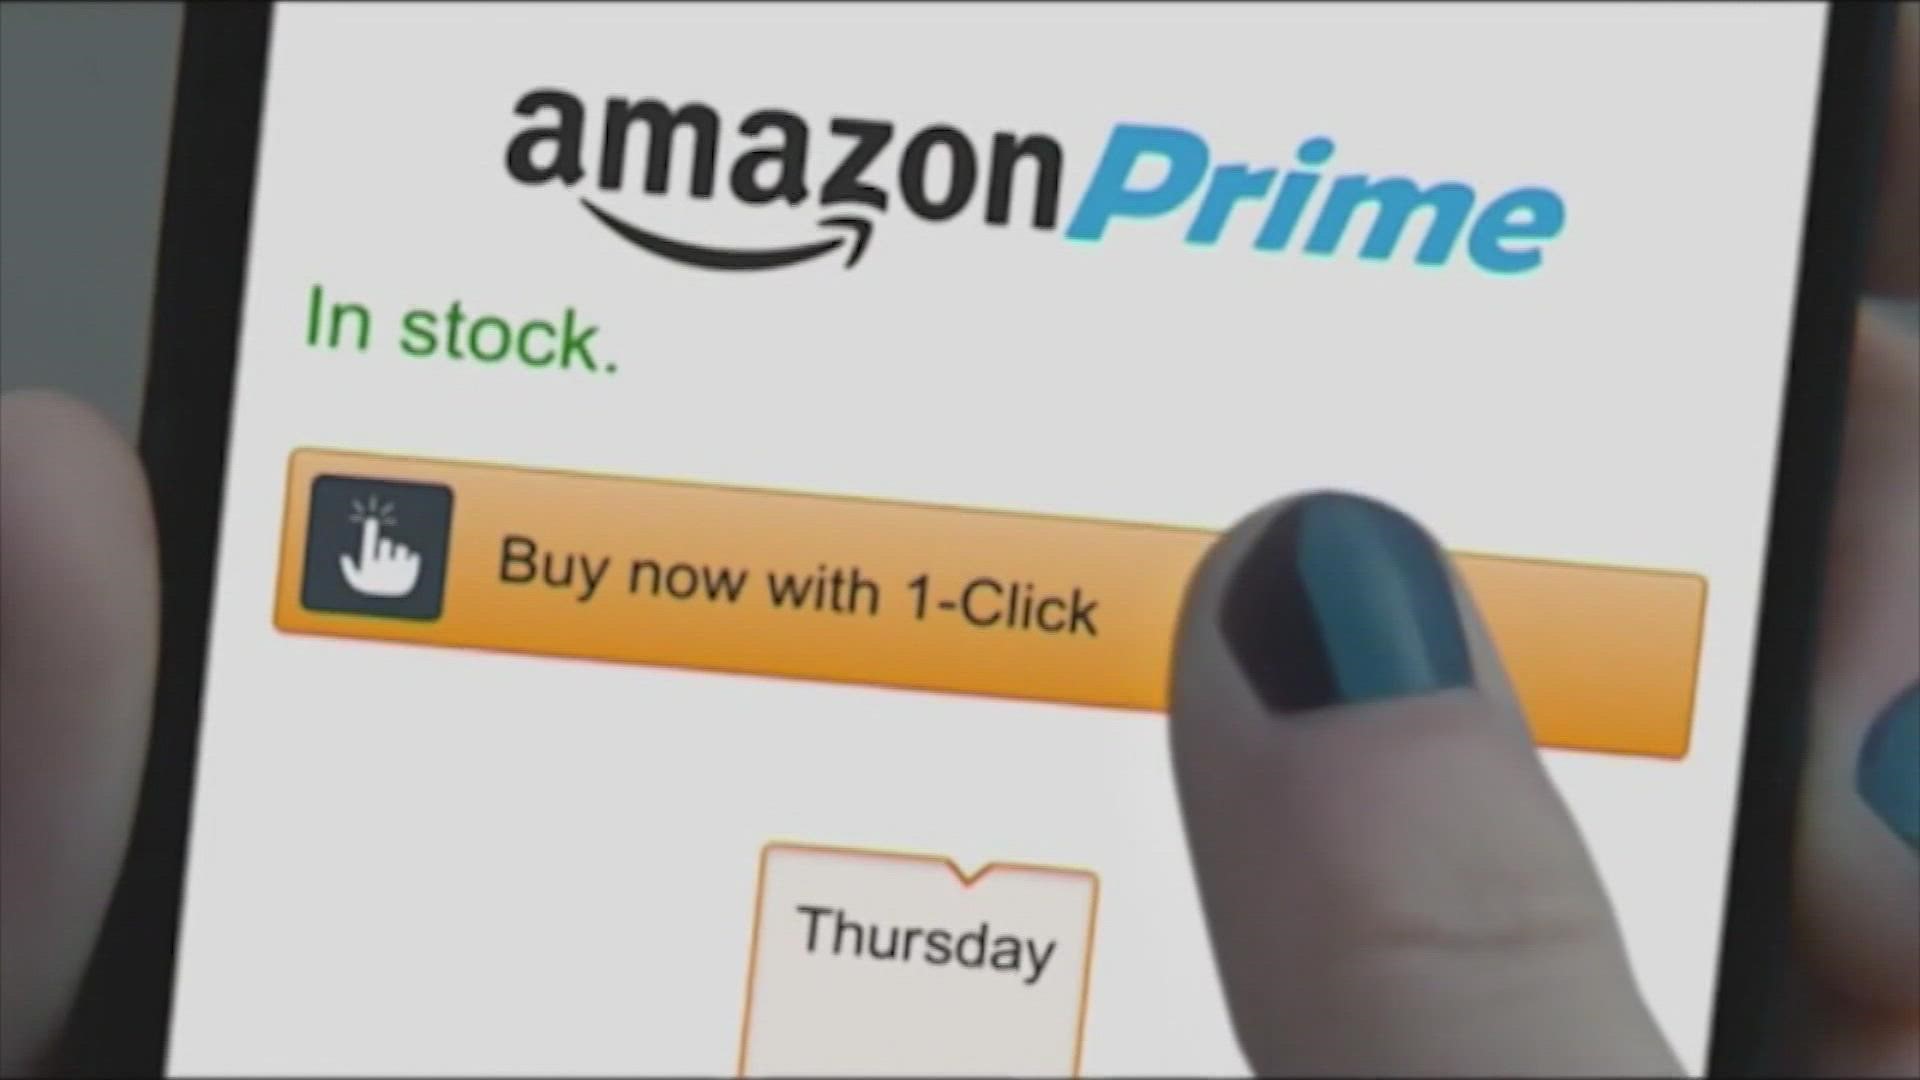 Shoppers love Amazon Prime. But members are about to be hit with another price hike in a few weeks.